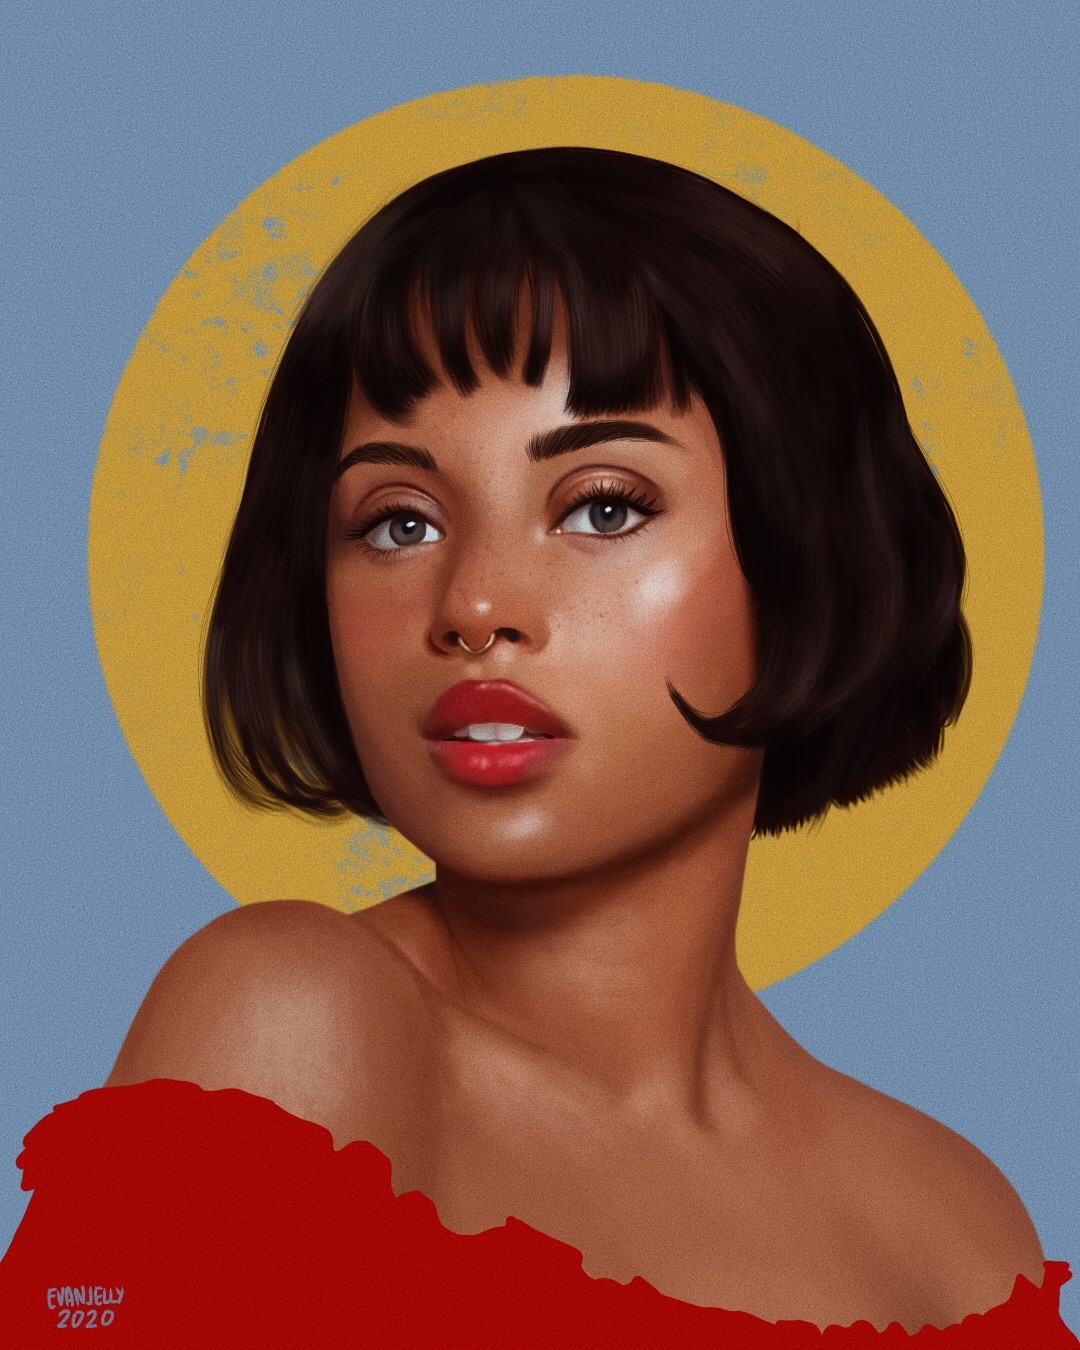 Been trying to use this time to get better at digital portraits